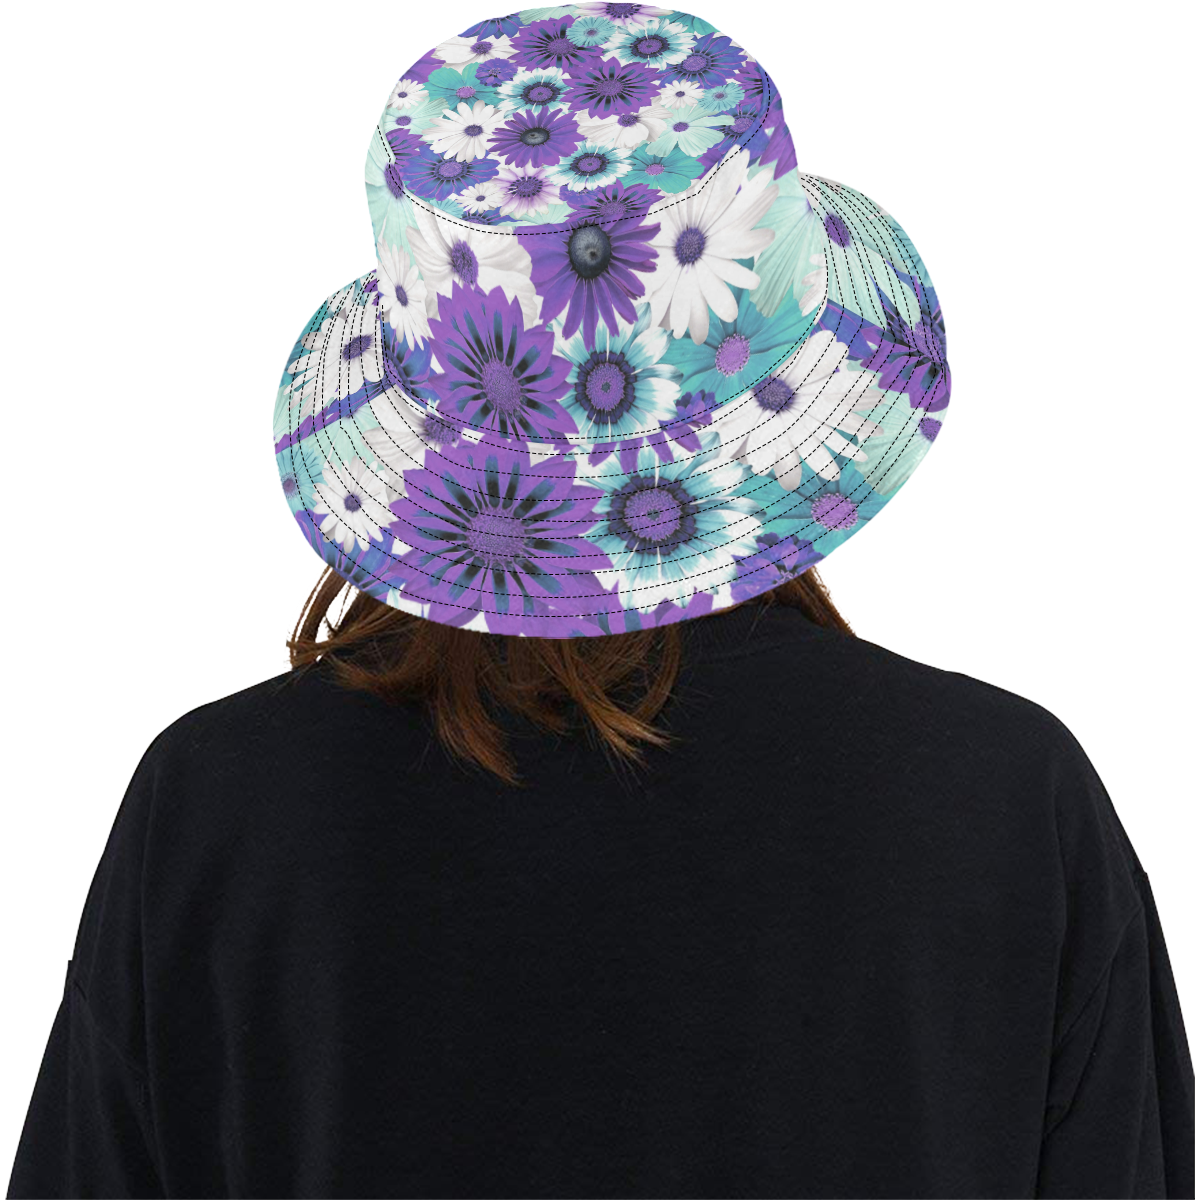 Spring Time Flowers 6 All Over Print Bucket Hat